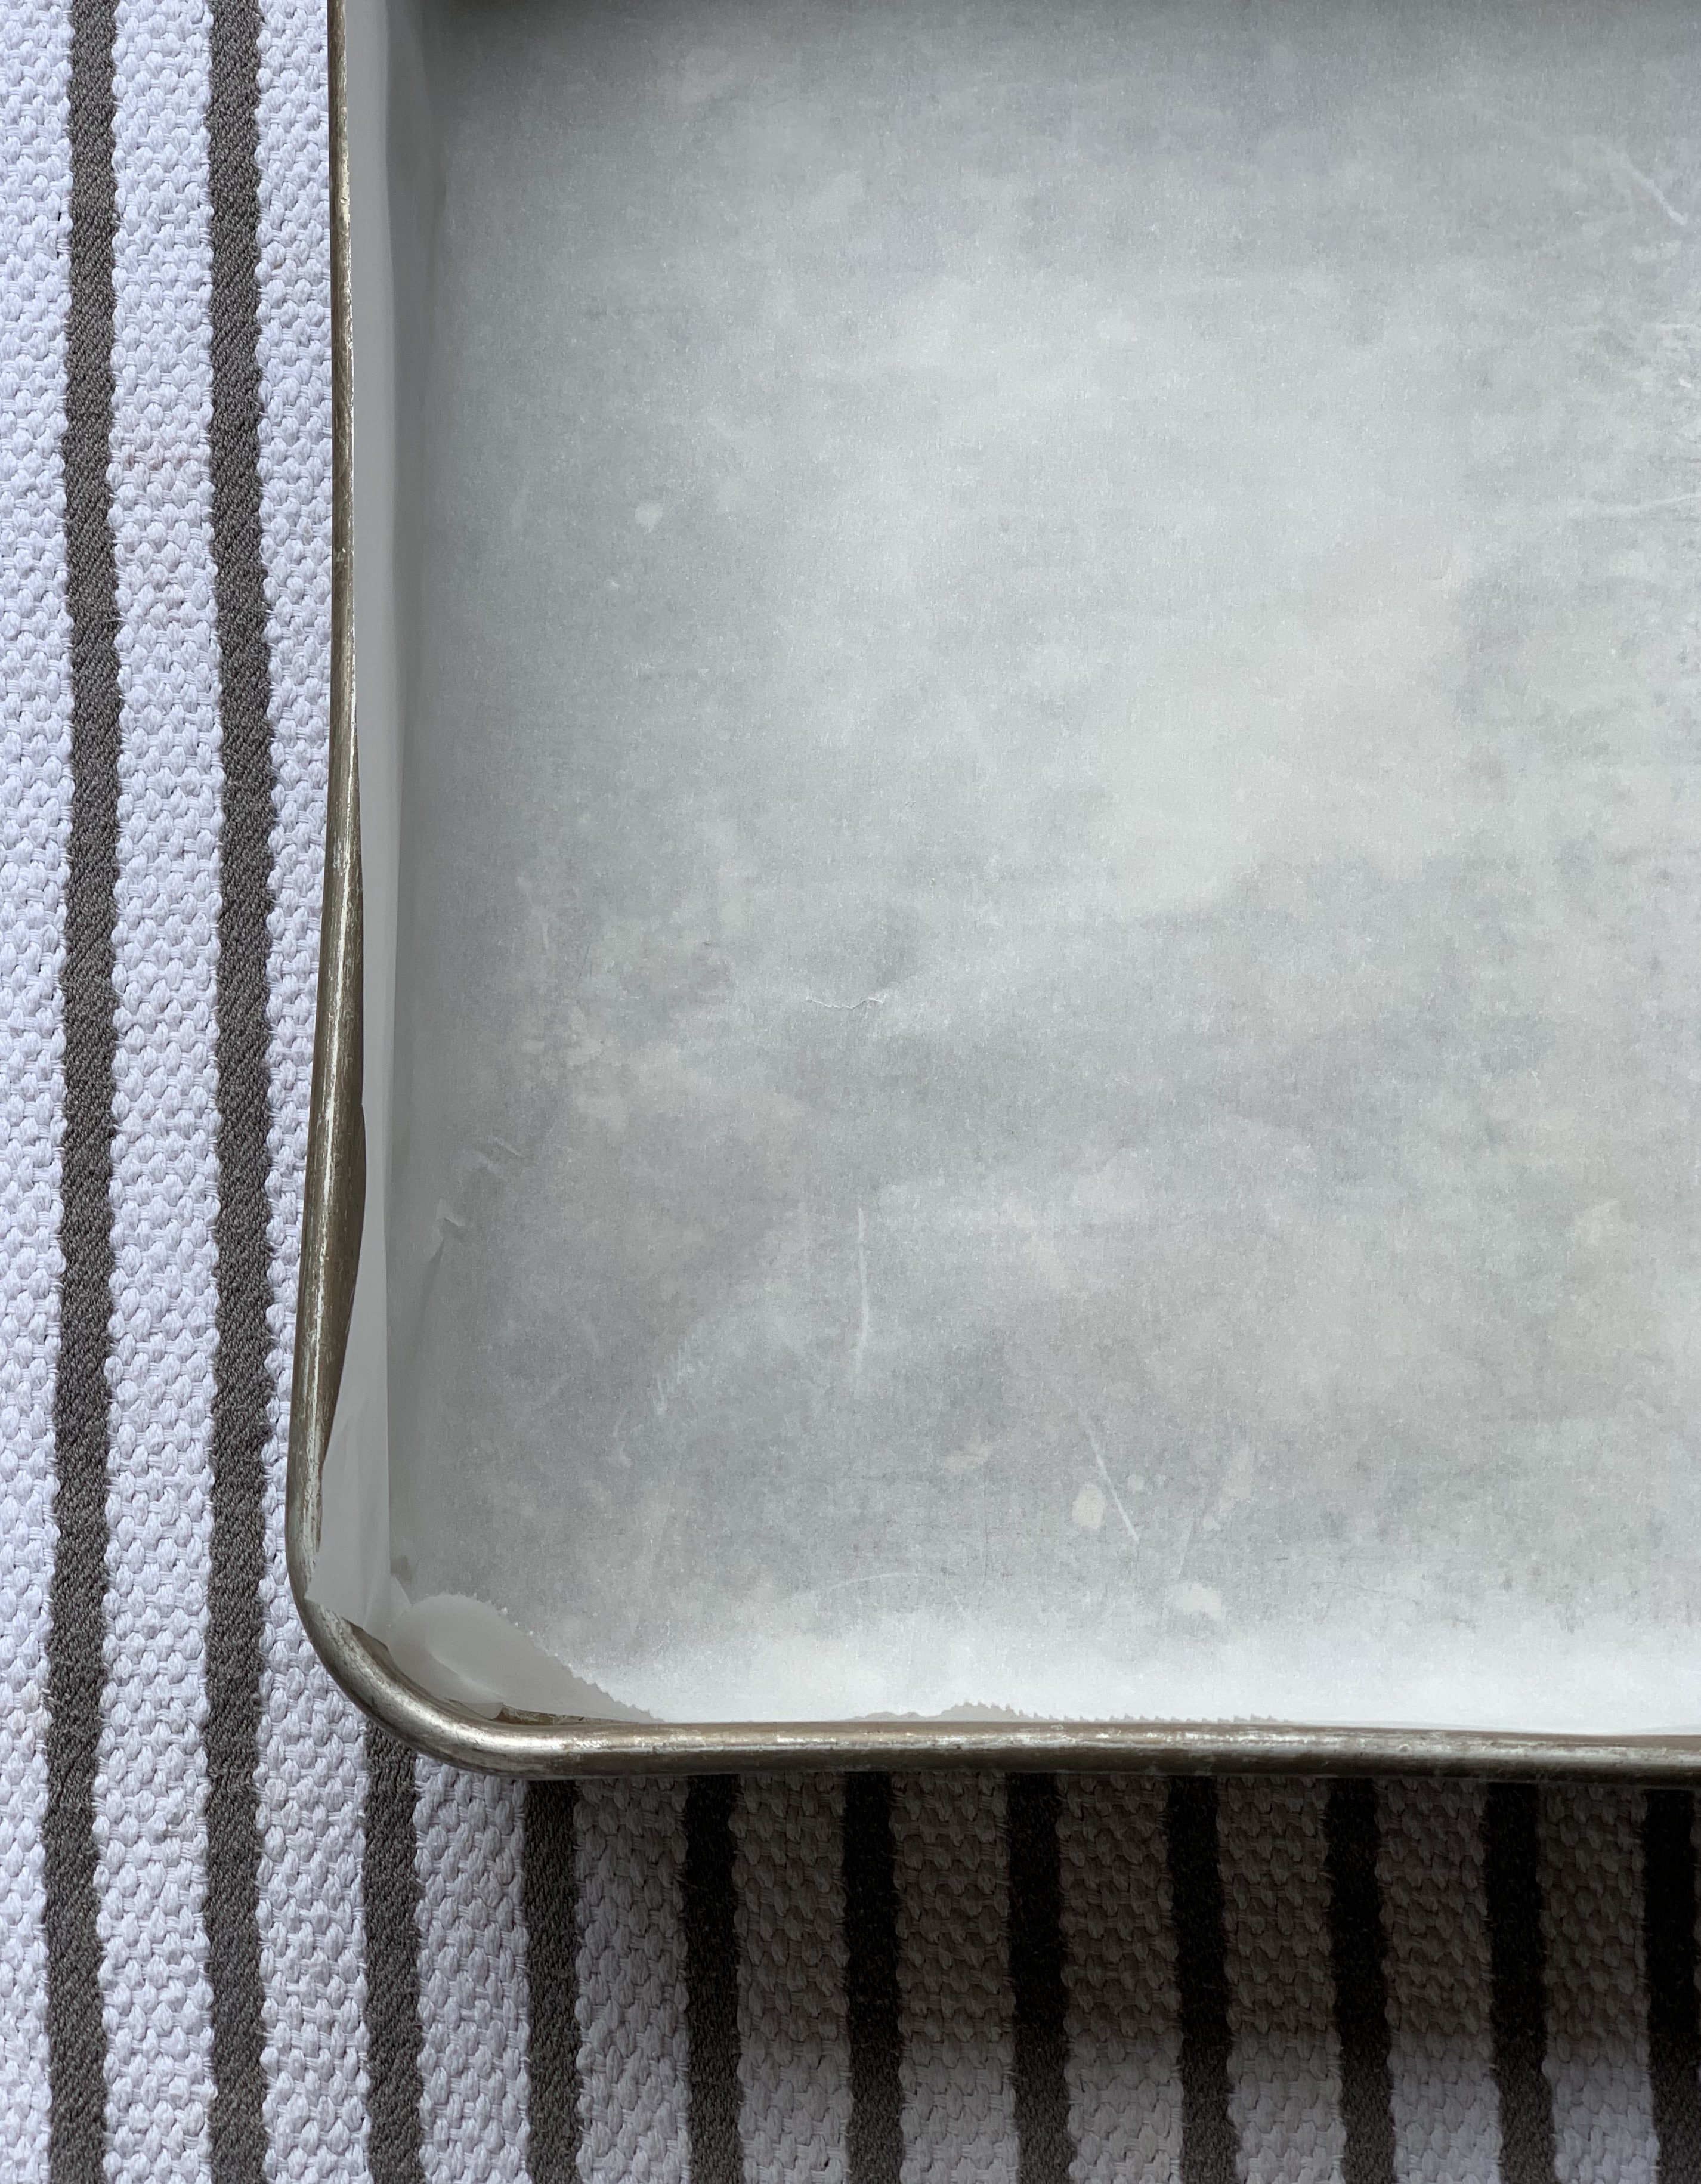 Baking Tip: How to Line a Pan with Parchment Paper